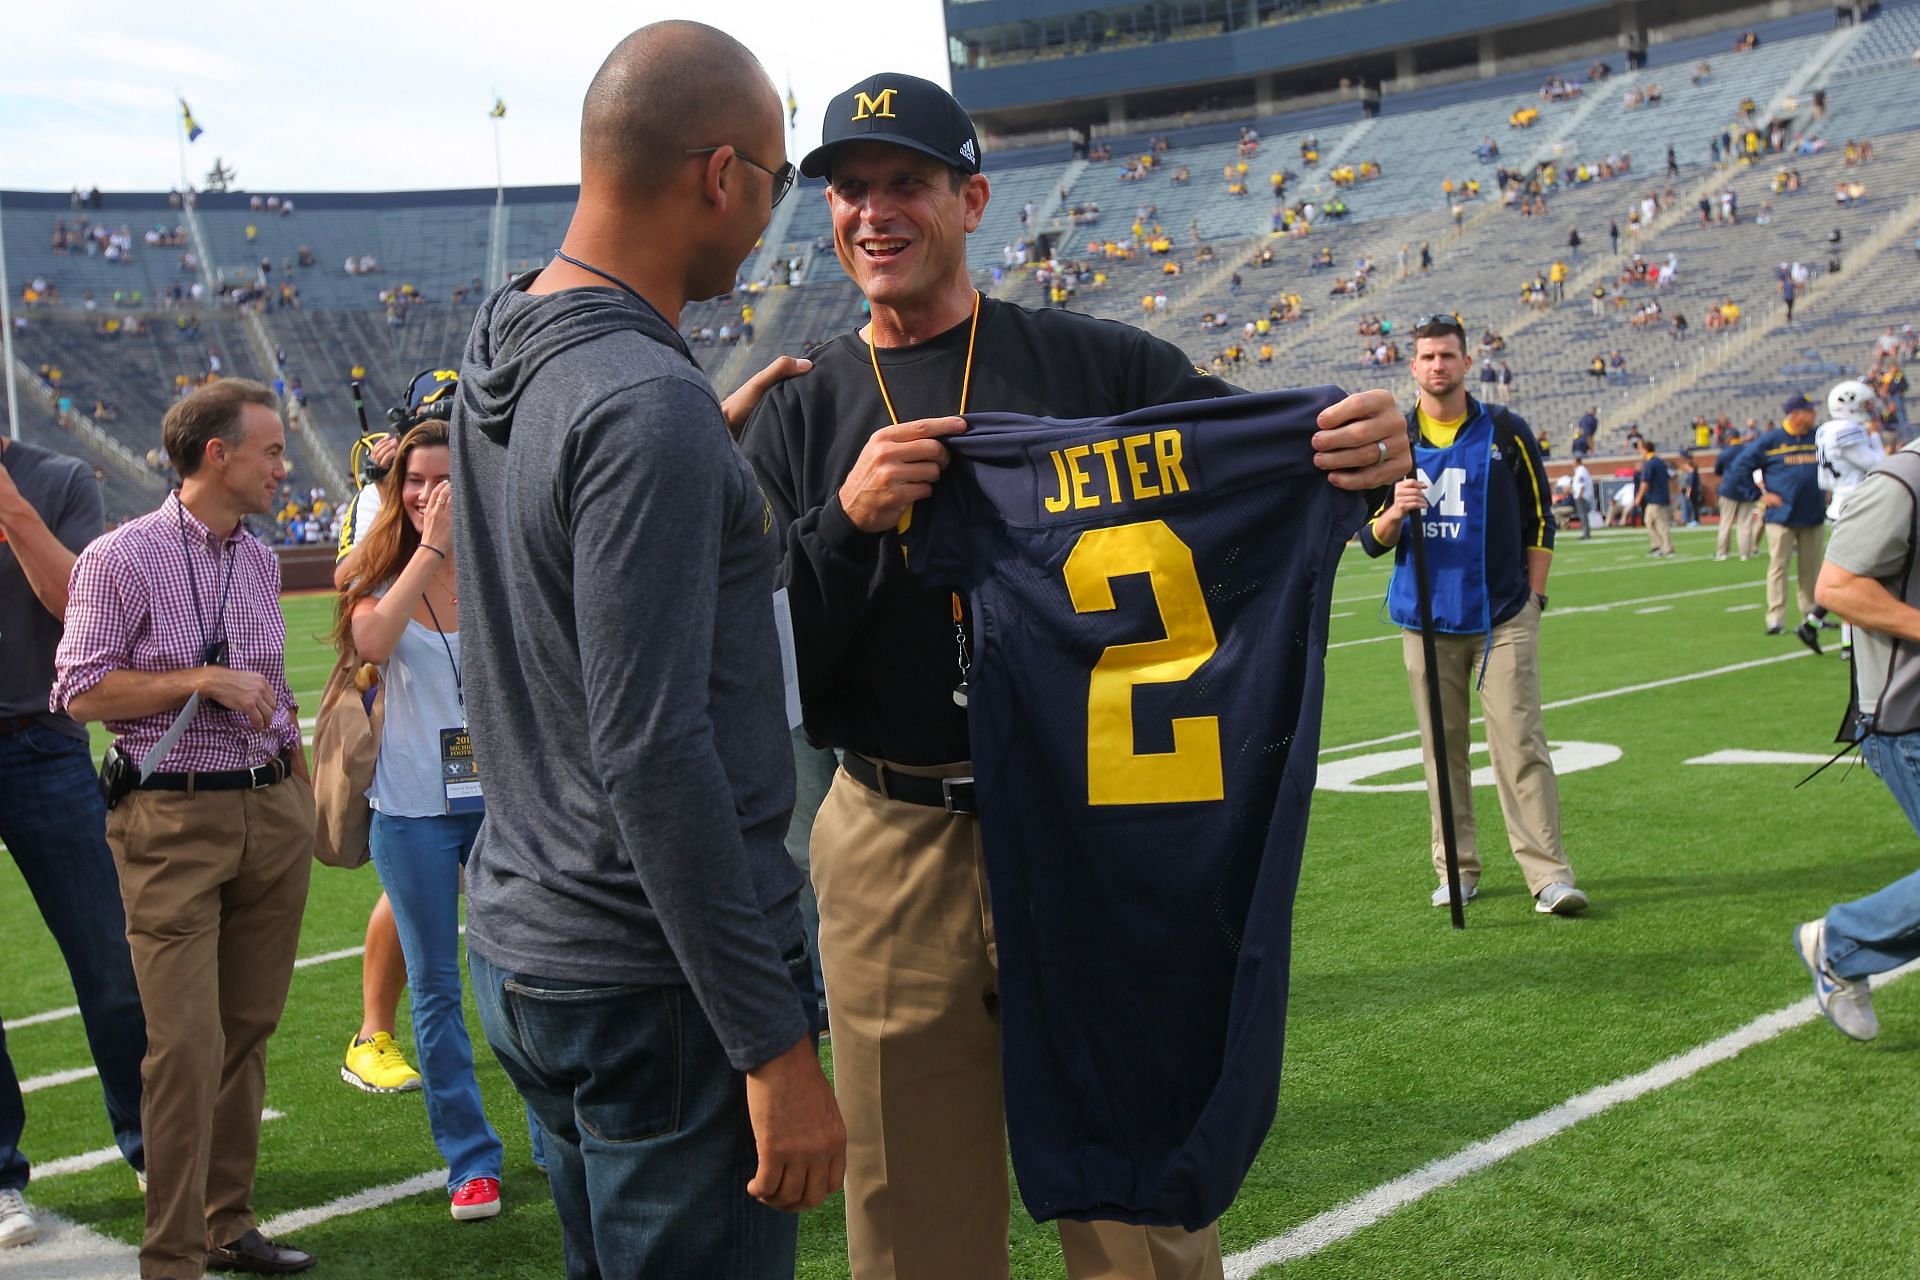 Jim Harbaugh of the Michigan Wolverines presents Derek Jeter (L) with a jersey at Michigan Stadium